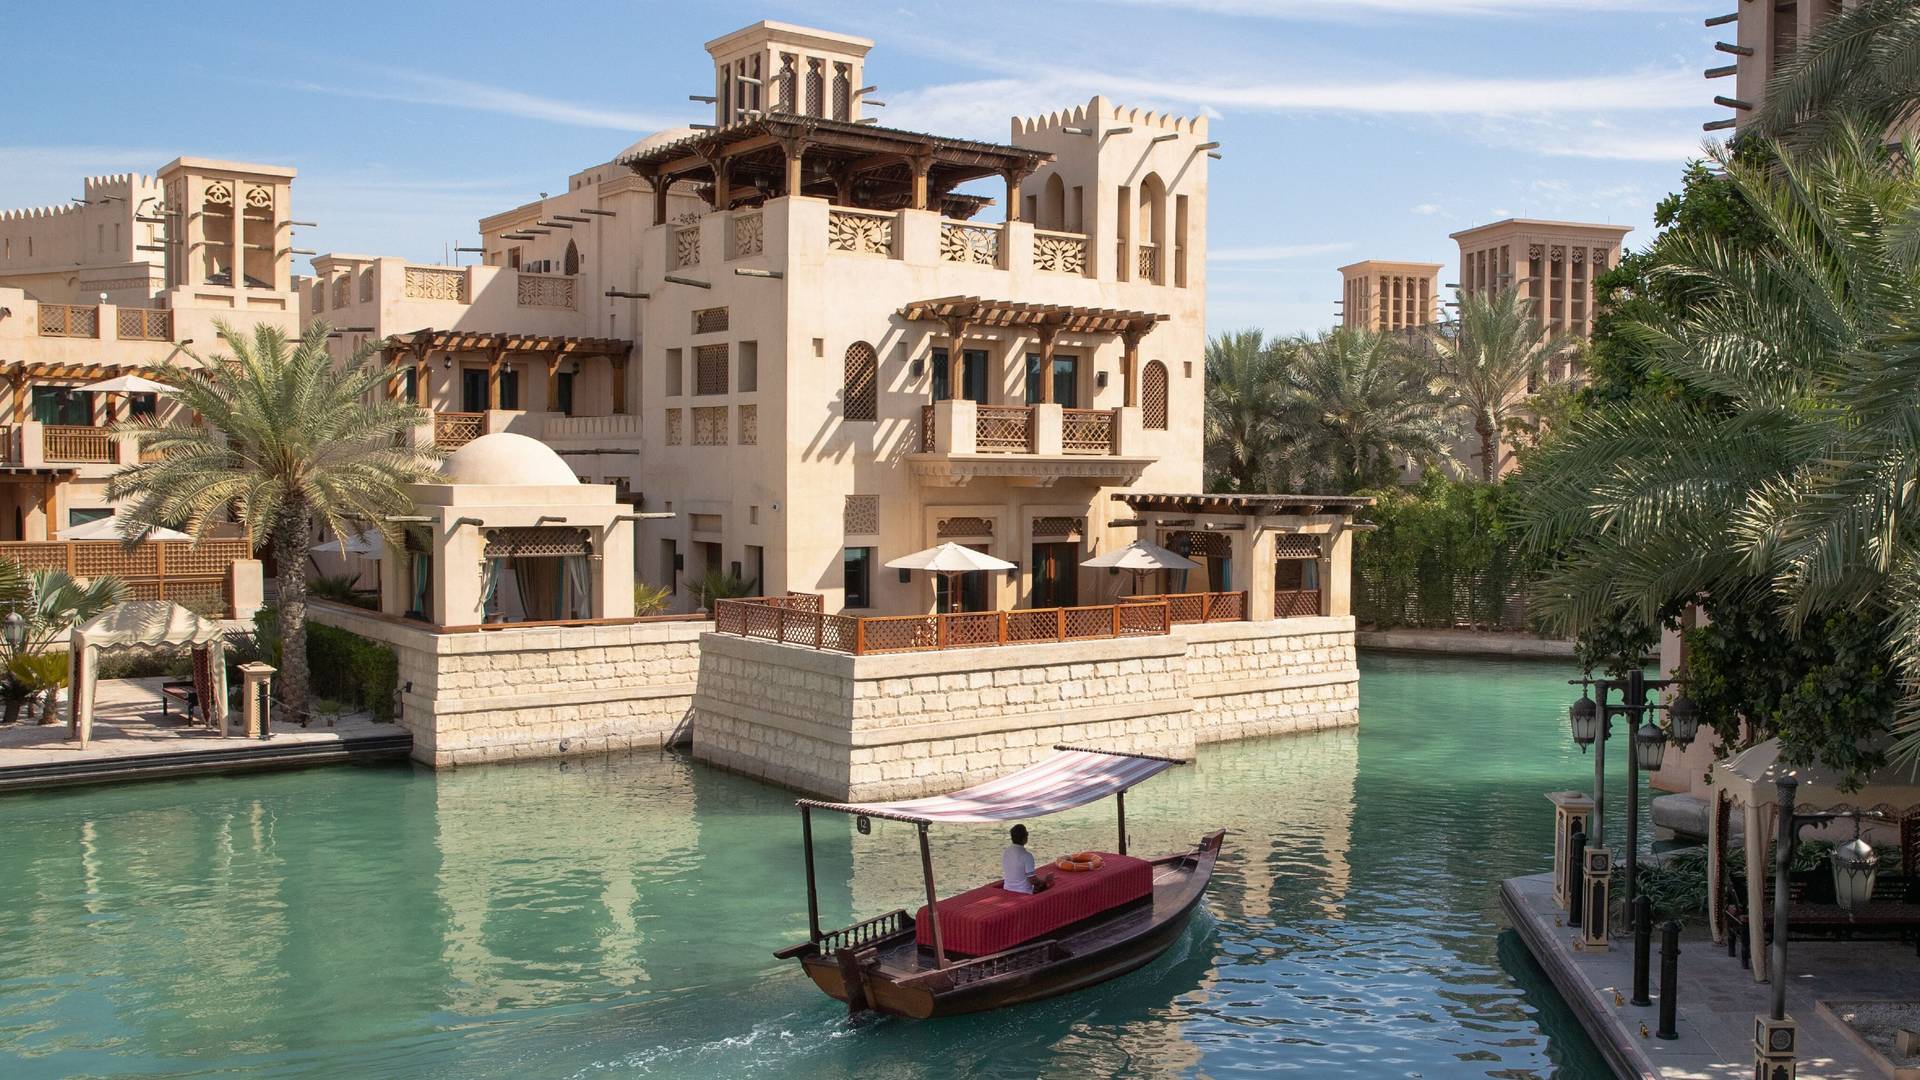 Abra gliding along the picturesque waterways at Madinat Jumeirah in Dubai